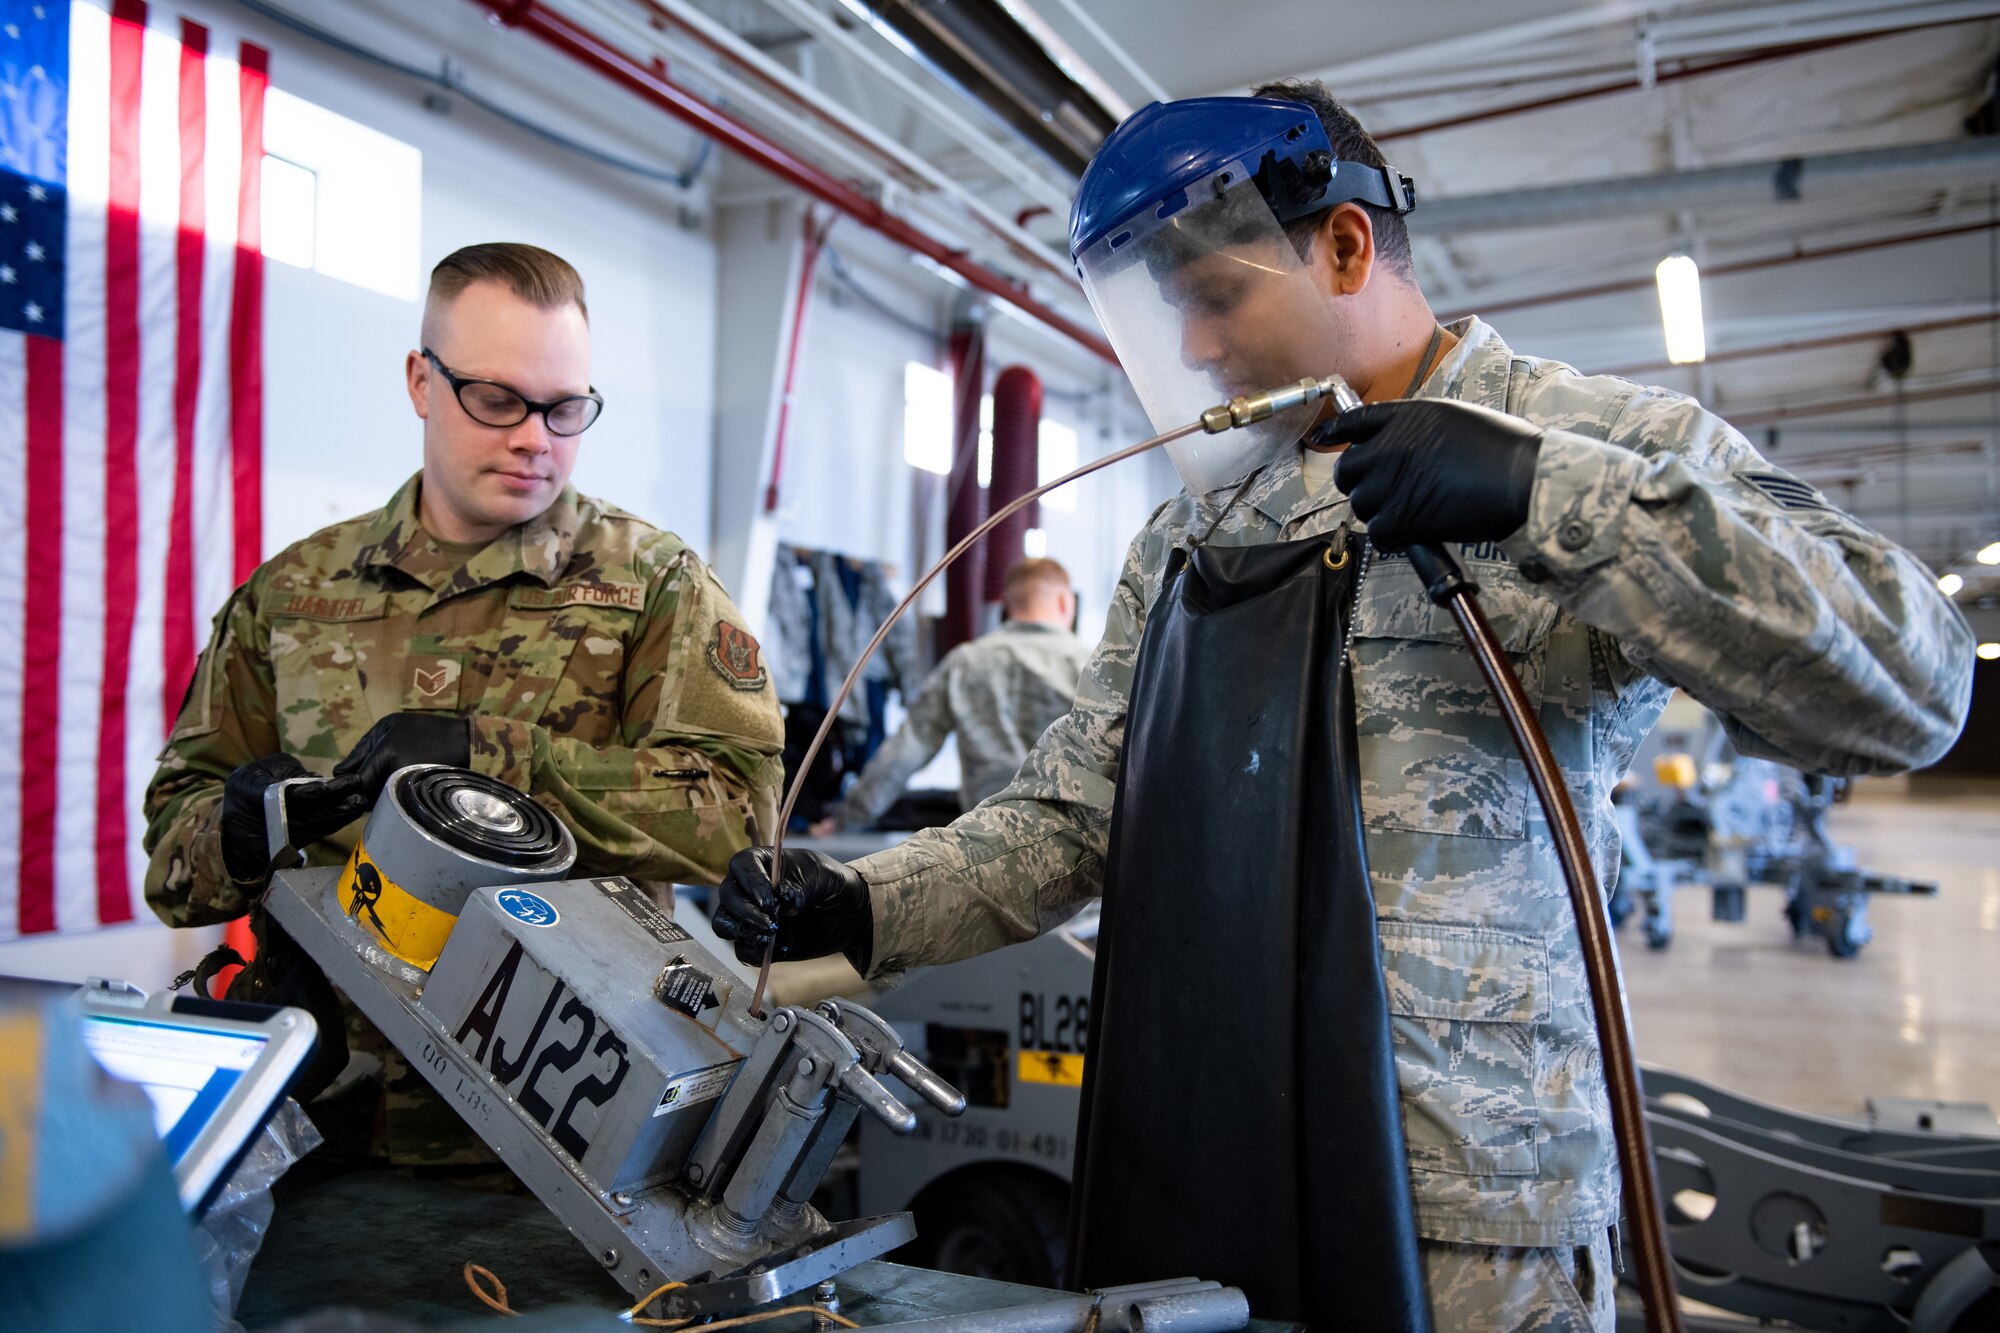 Staff Sgt. Emmanuel May, right, and Staff Sgt Keith Hartfiel, 419th Maintenance Squadron Aerospace Ground Equipment Flight, remove fluid from a piece of equipment during maintenance at Hill Air Force Base, Utah, Oct. 4, 2019. Unit Airmen maintain over 600 pieces of equipment that support the mission of crew chiefs, avionics, weapons and ammo troops. (U.S. Air Force photo by R. Nial Bradshaw)